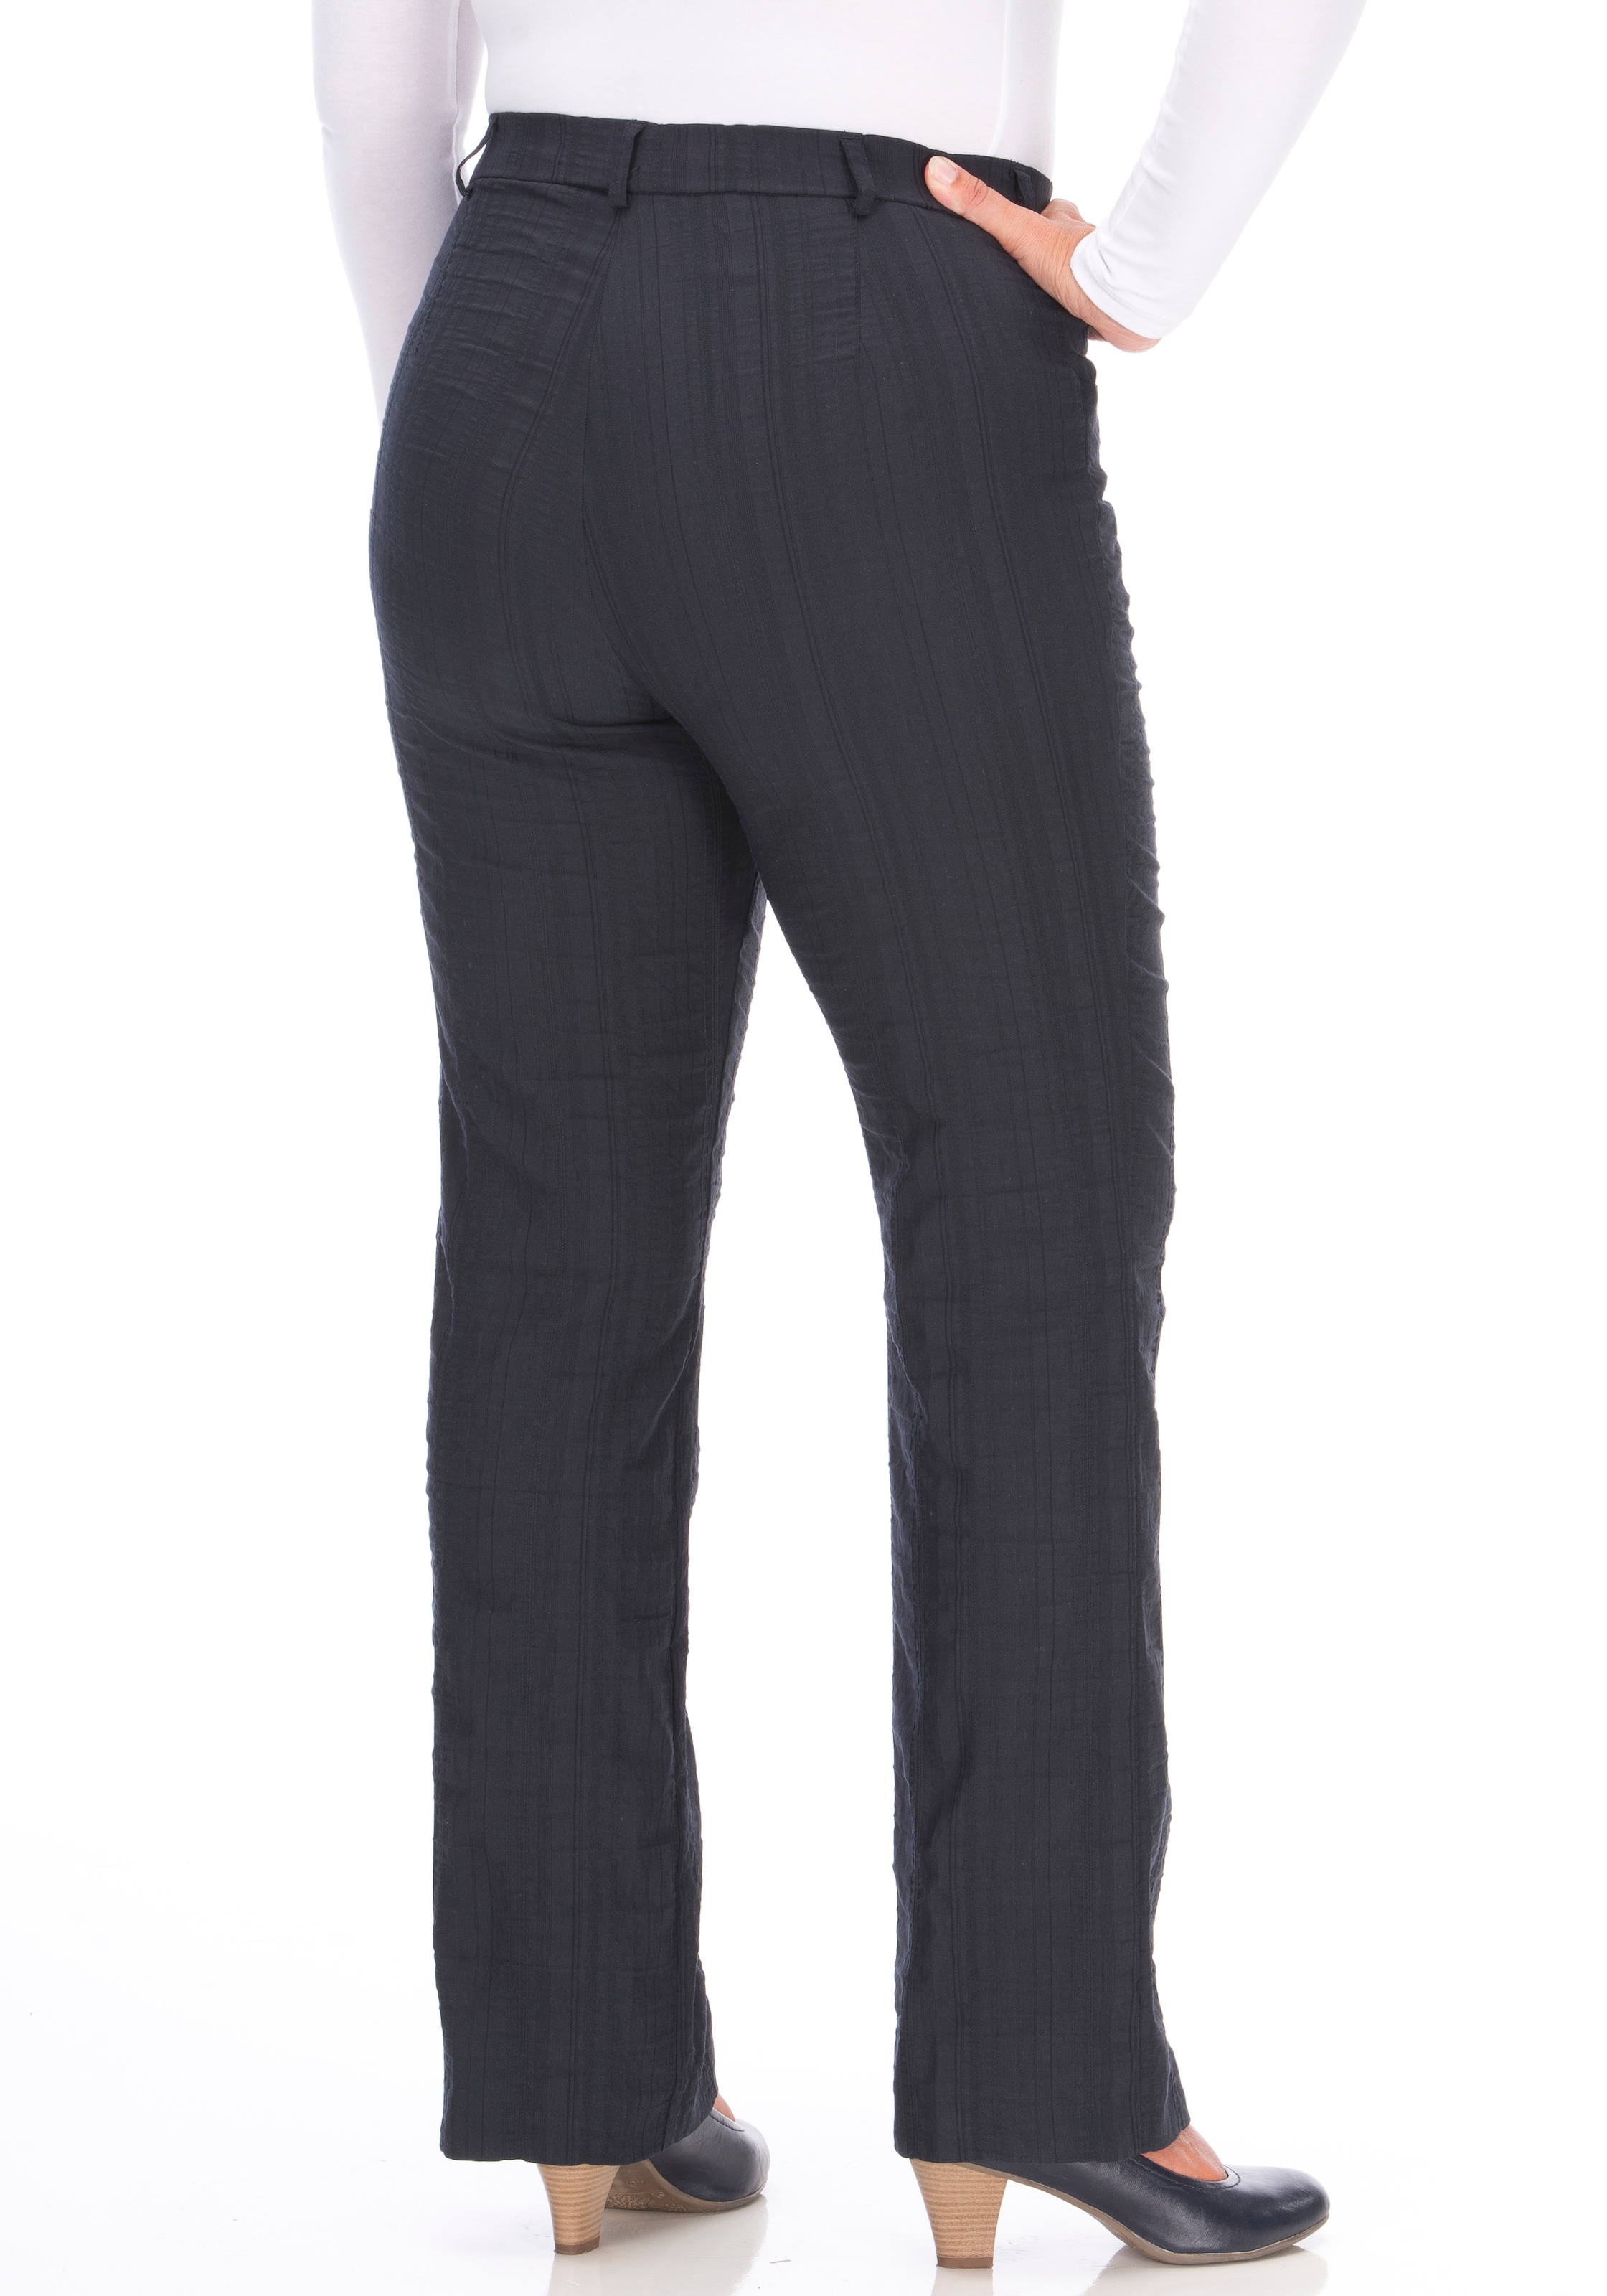 bei KjBRAND Stoffhose »Bea«, in Passform optimale Quer-Stretch ♕